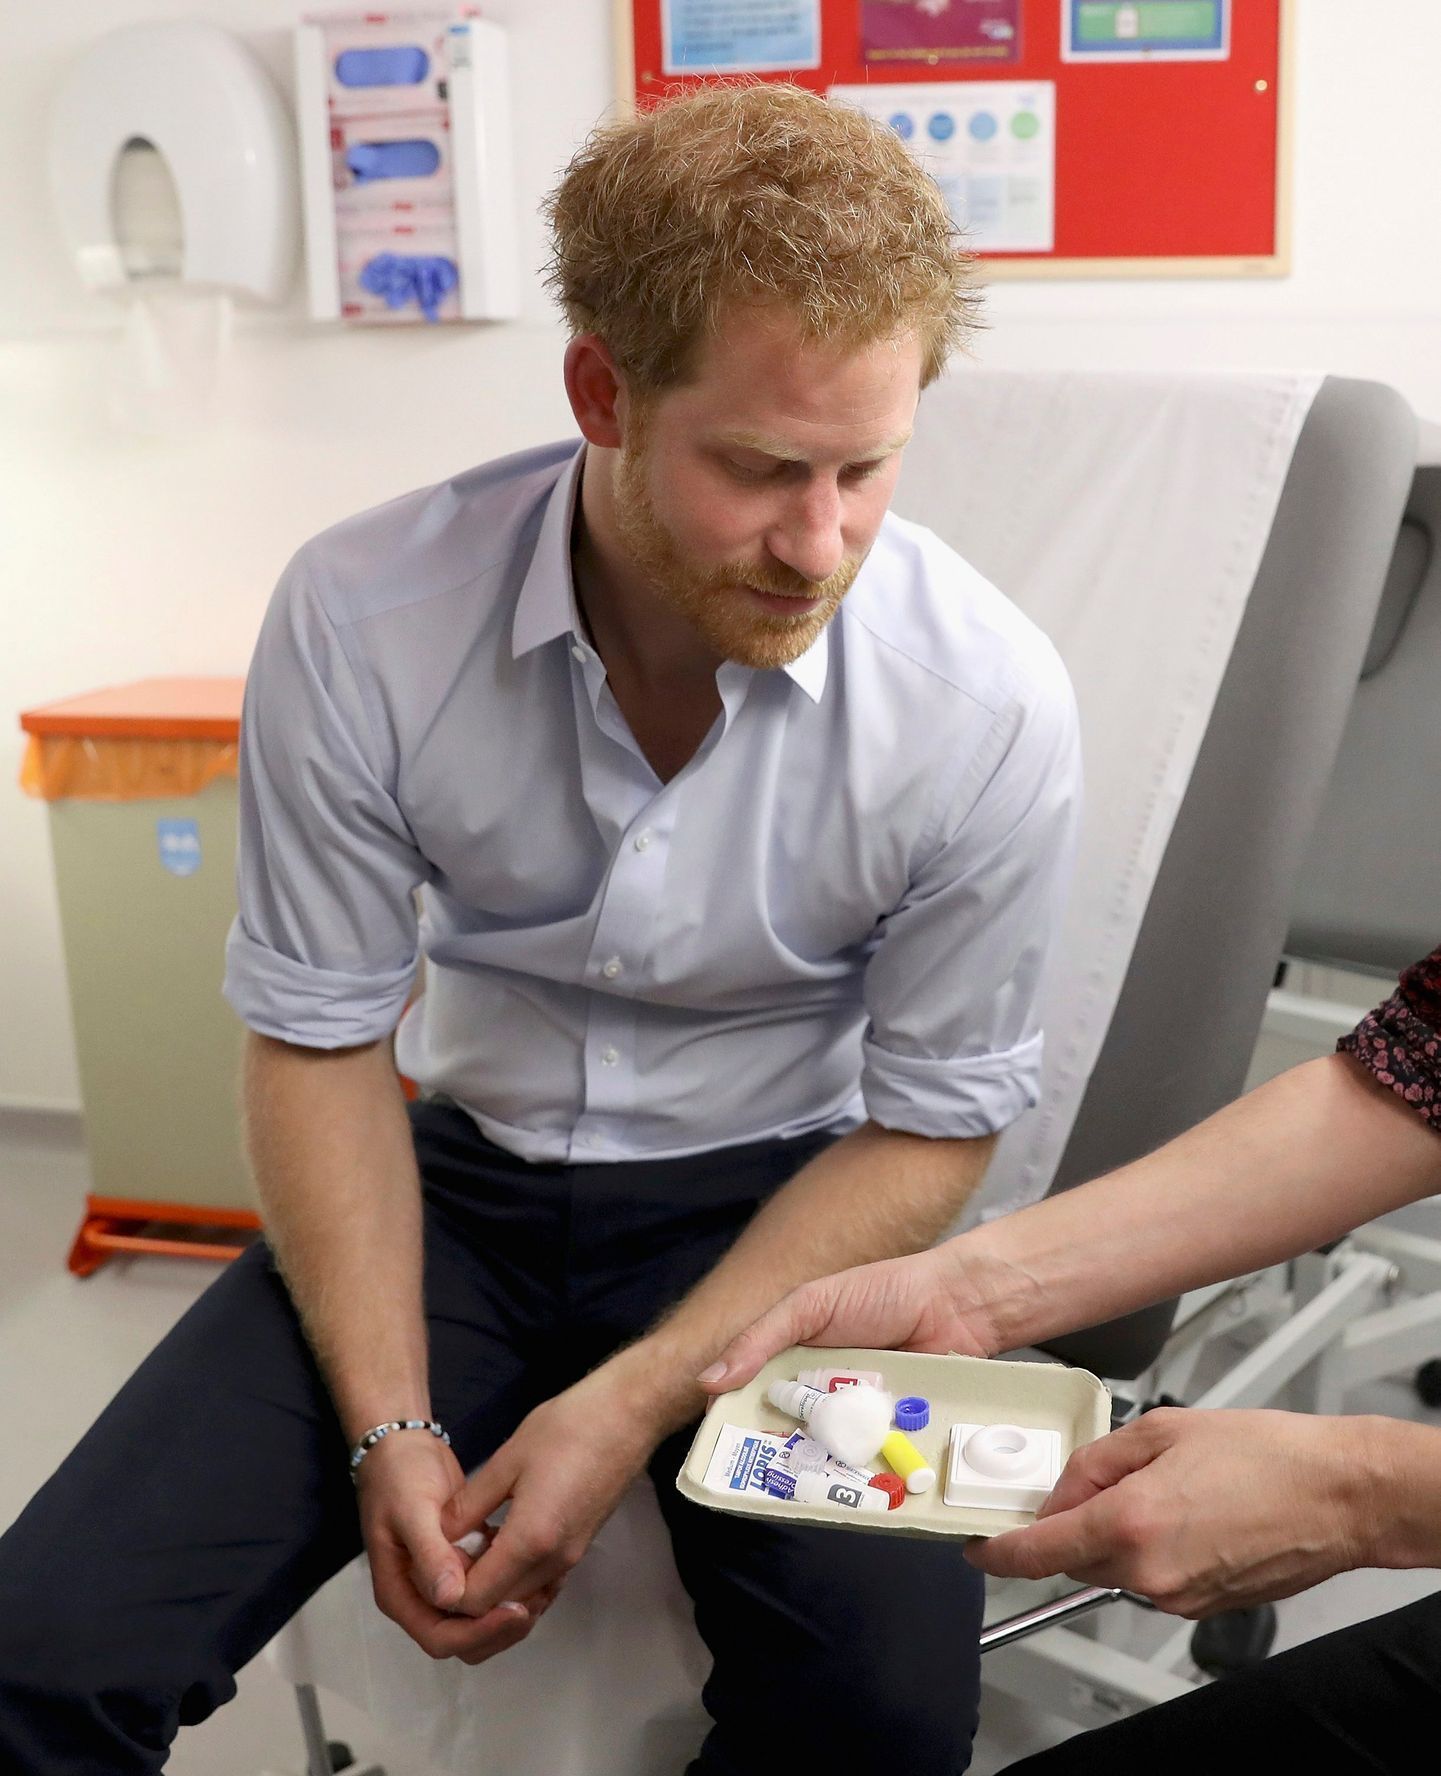 Prince Harry is shown the negative result of his HIV test by Specialist Psychotherapist Robert Palmer at the Burrell Street Sexual Health Clinic in London